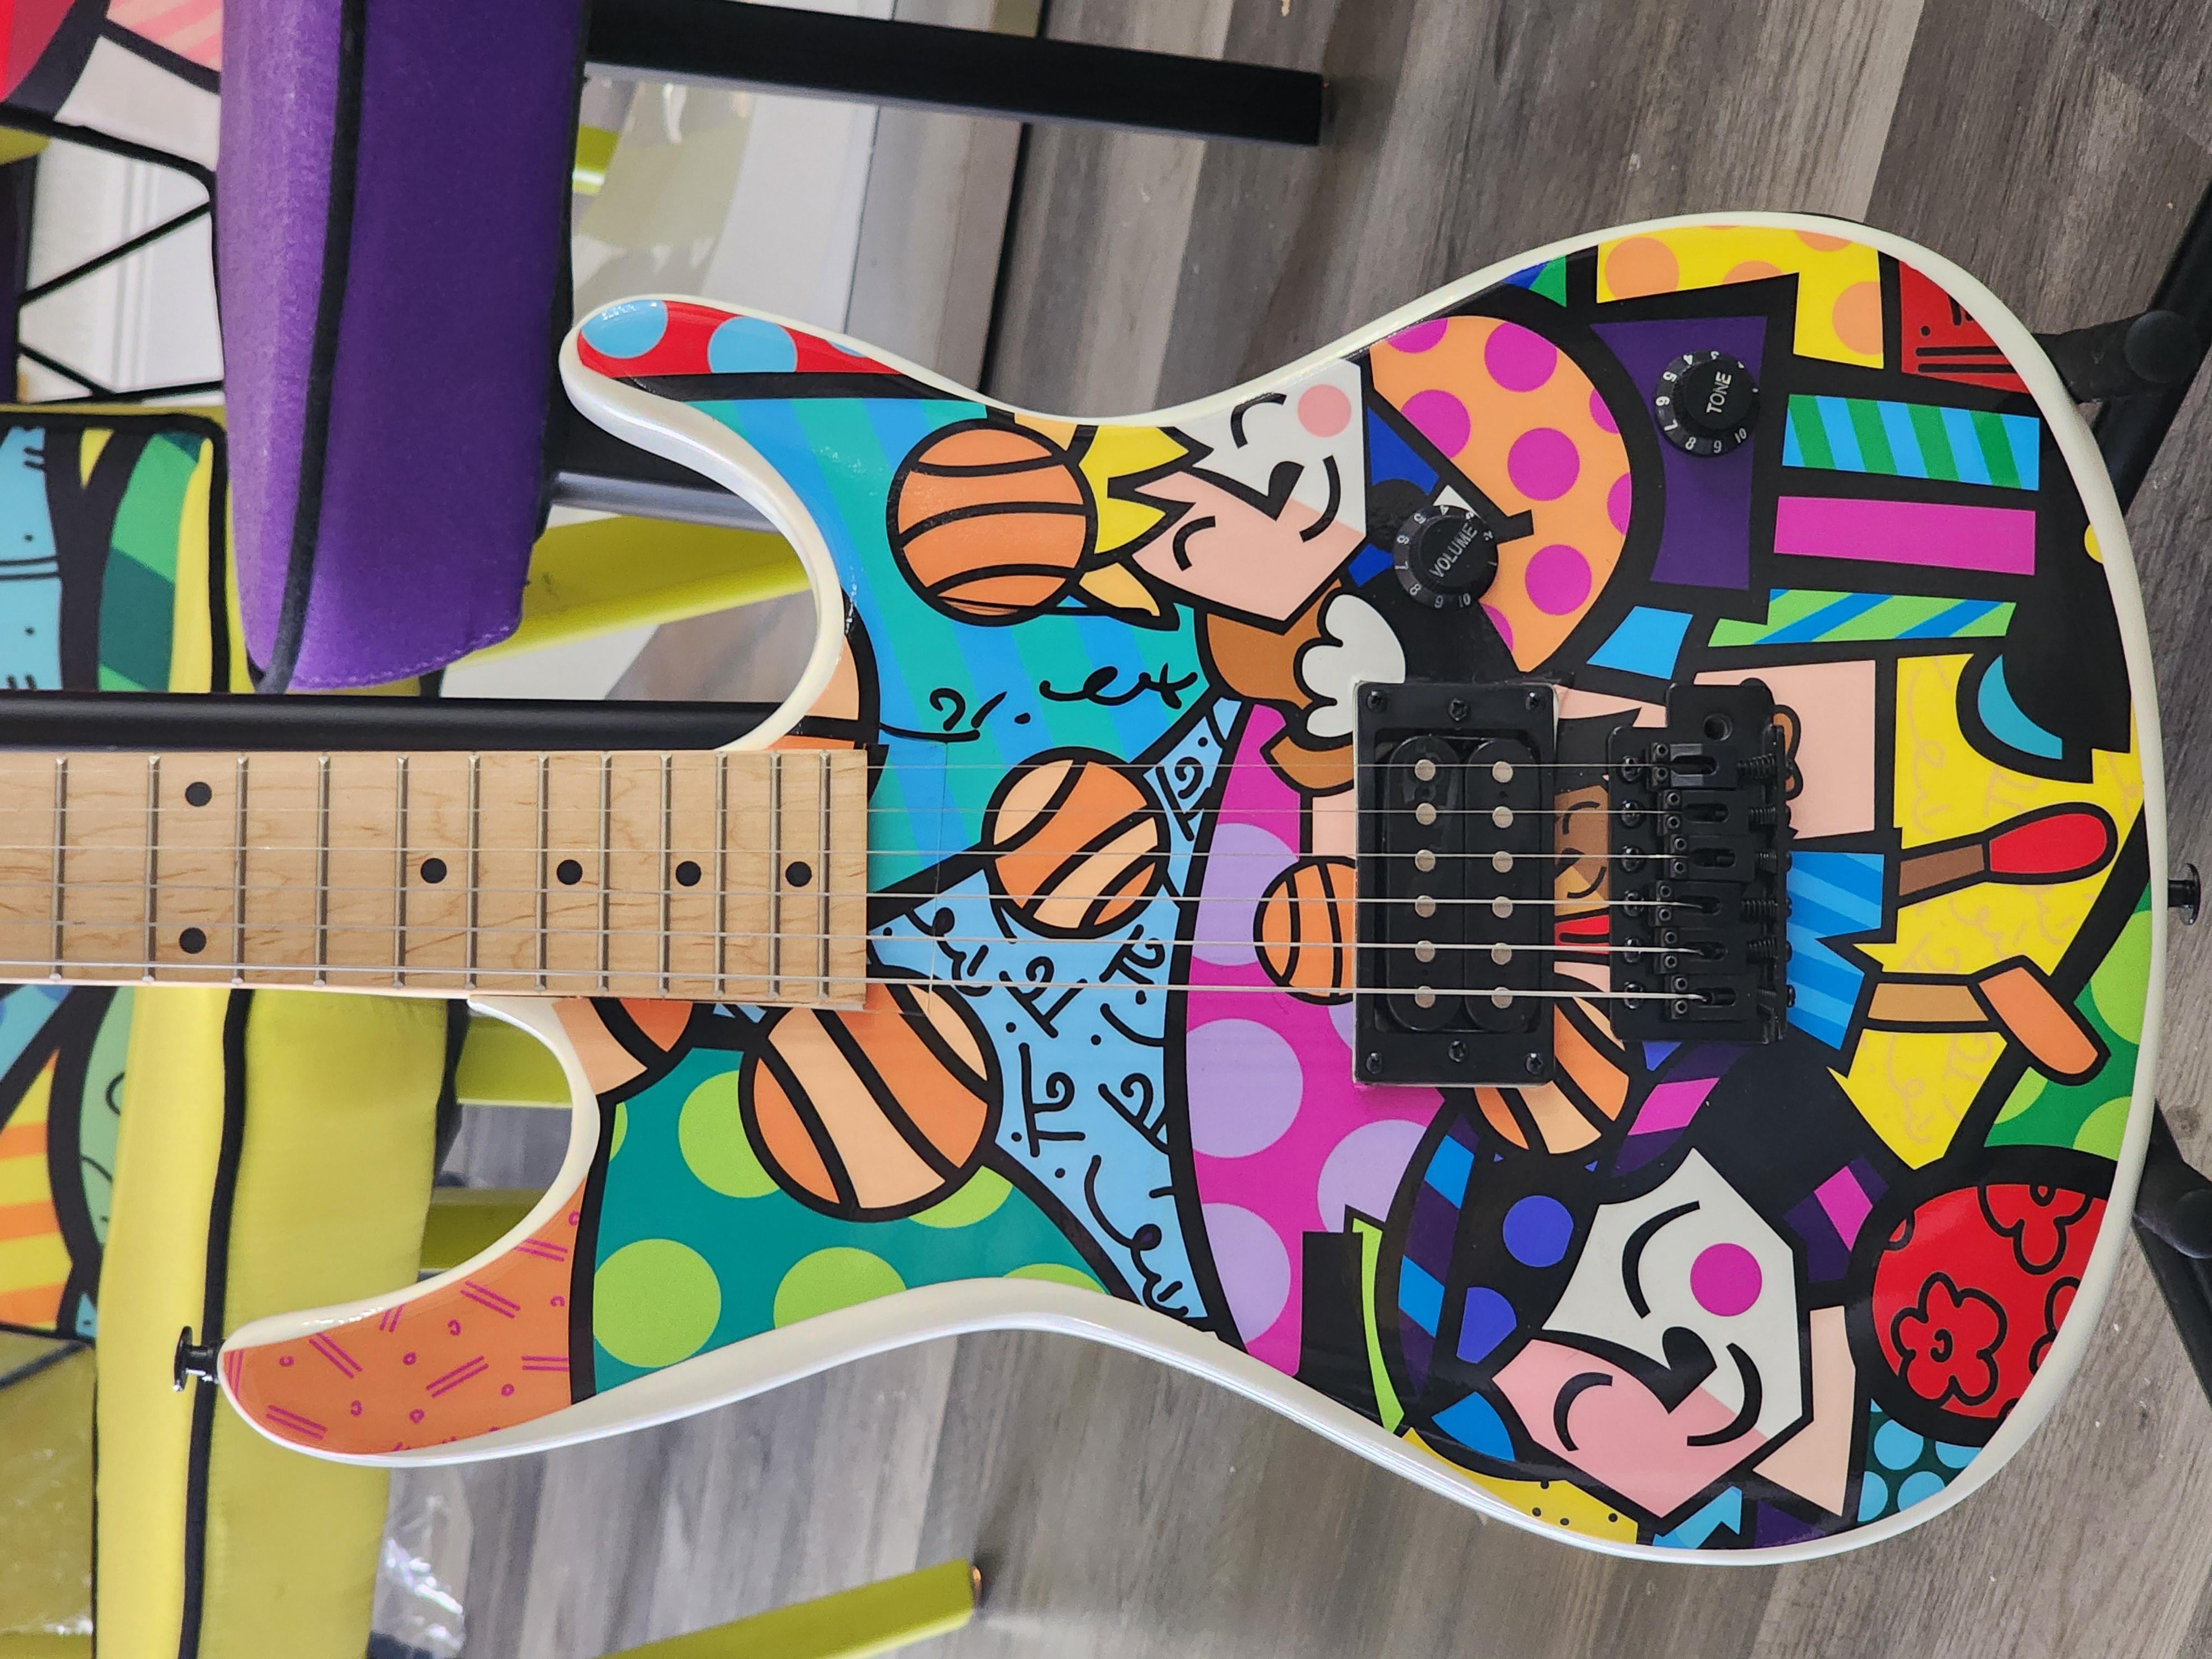 Artist: Romero Britto
Signed one of a kind, 'Viper' electric guitar by BGuitars. The guitar helped to raise 1M dollars for Lauren's kids foundation - An organization that educates adults and children to prevent sexual abuse and heal survivors.